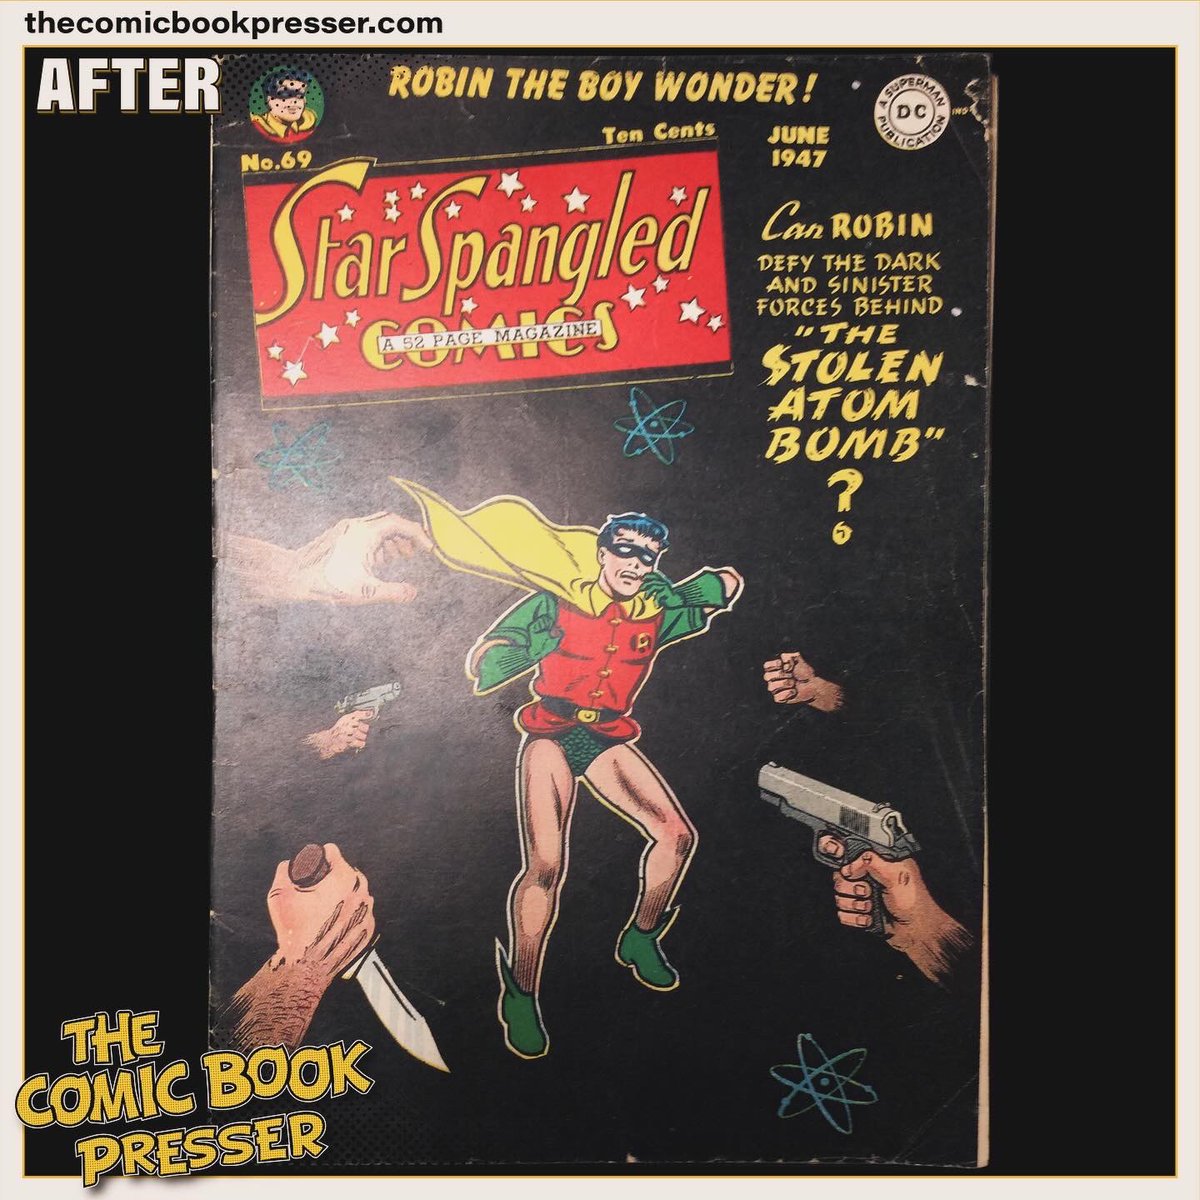 This classic Star-Spangled Comics from 1947 got a makeover! We pressed out those pesky bends, dry cleaned for a brighter look, and even fixed the spine roll.
#thecomicbookpresser #comics #cgc #comicbooks #comicpressing #batman #robin #detectivecomics #comicbookpressing